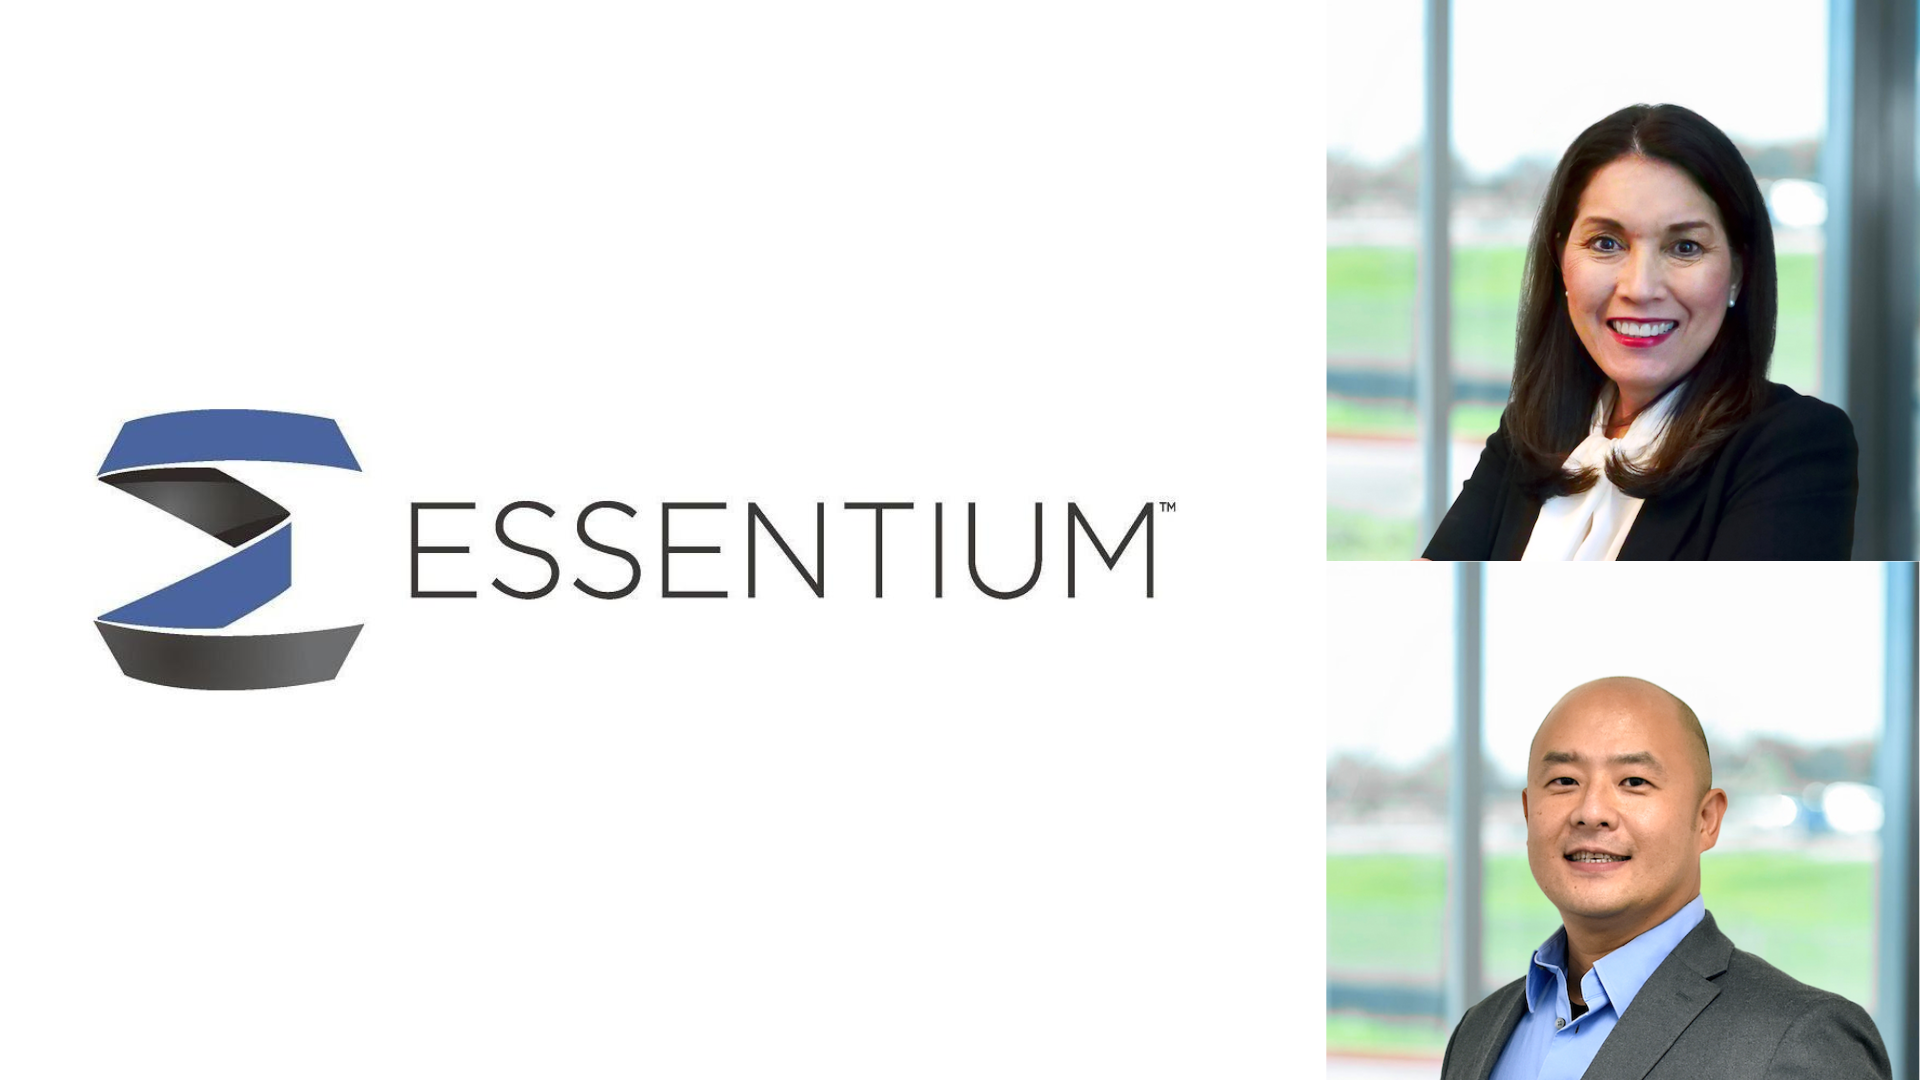 Essentium, Inc. appointed Edna Garcia as CFO and Will Chiang as COO to their executive leadership team overseeing strategic initiatives.